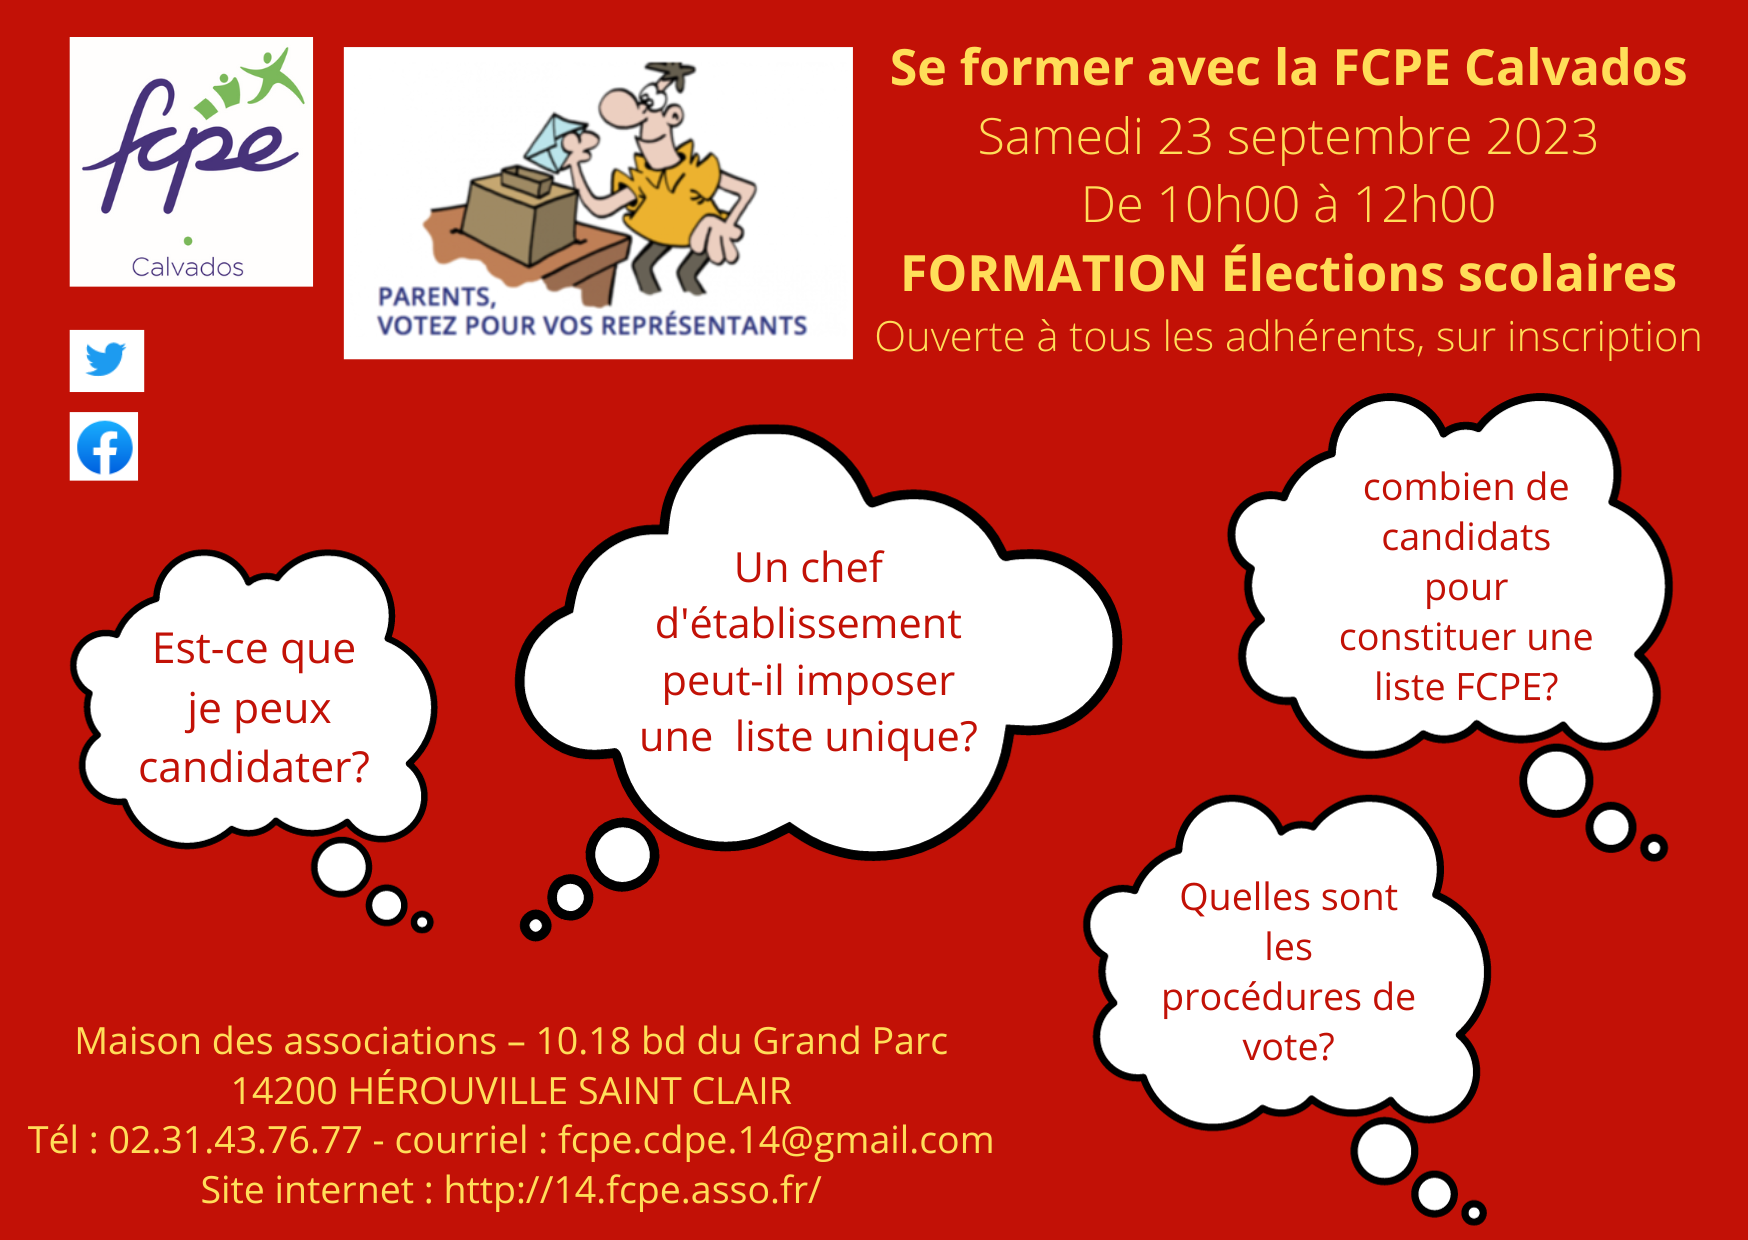 Elections scolaires. Formation